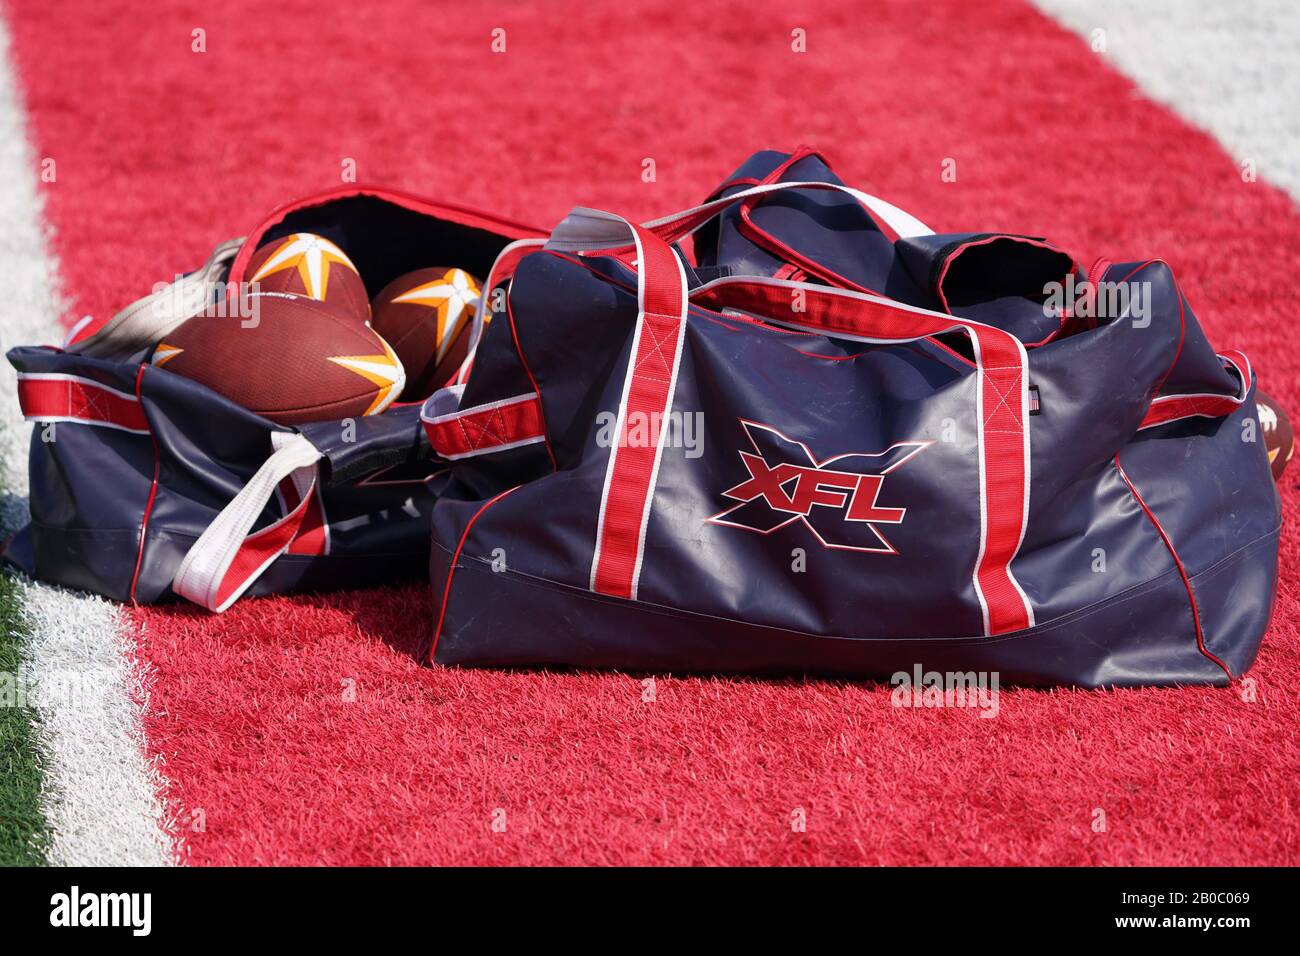 Detailed view of LA Wildcats football and bag with XFL logo during practice, Wednesday, Feb. 19, 2020, in Long Beach, Calif. (Photo by IOS/ESPA-Images) Stock Photo